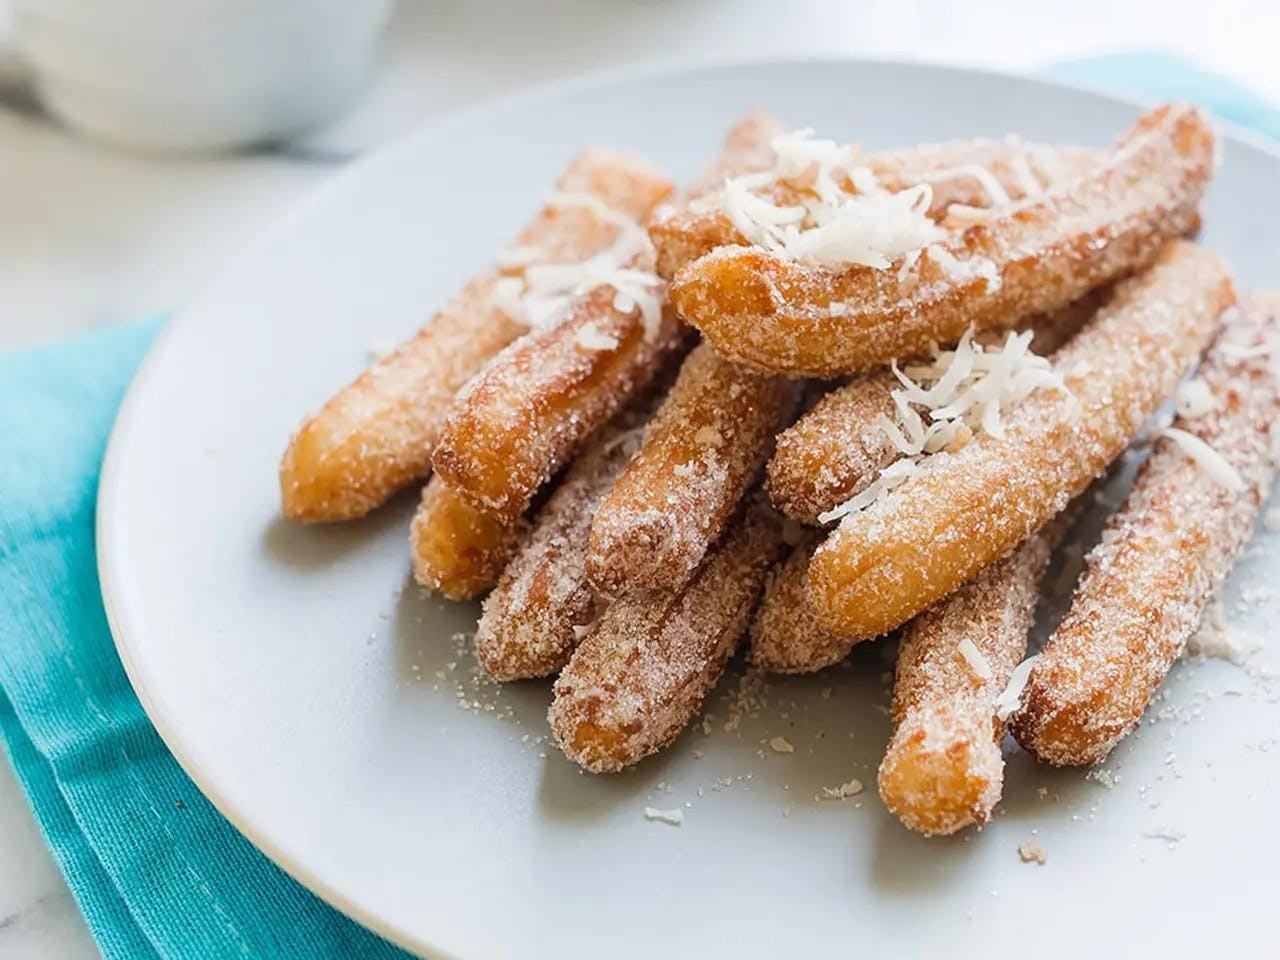 Close up of churros with cinnamon coconut sugar on plate.